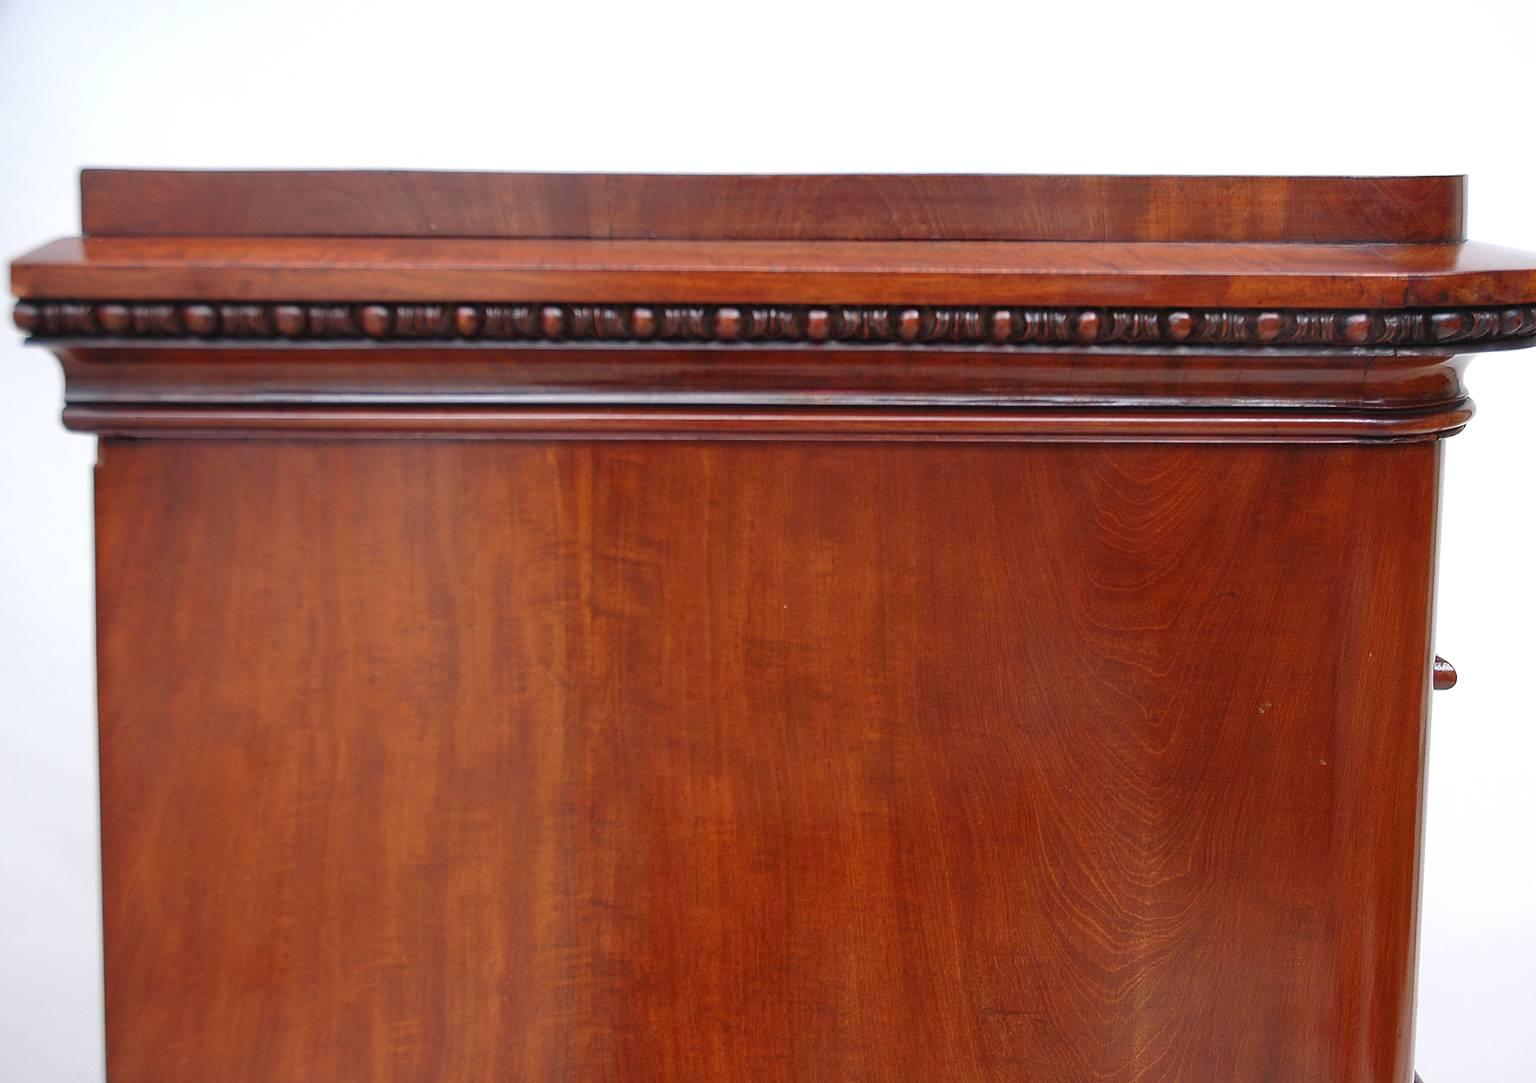 Polished Antique Biedermeier Tall Chest of Drawers in Bookmatched Mahogany, Denmark, 1840 For Sale